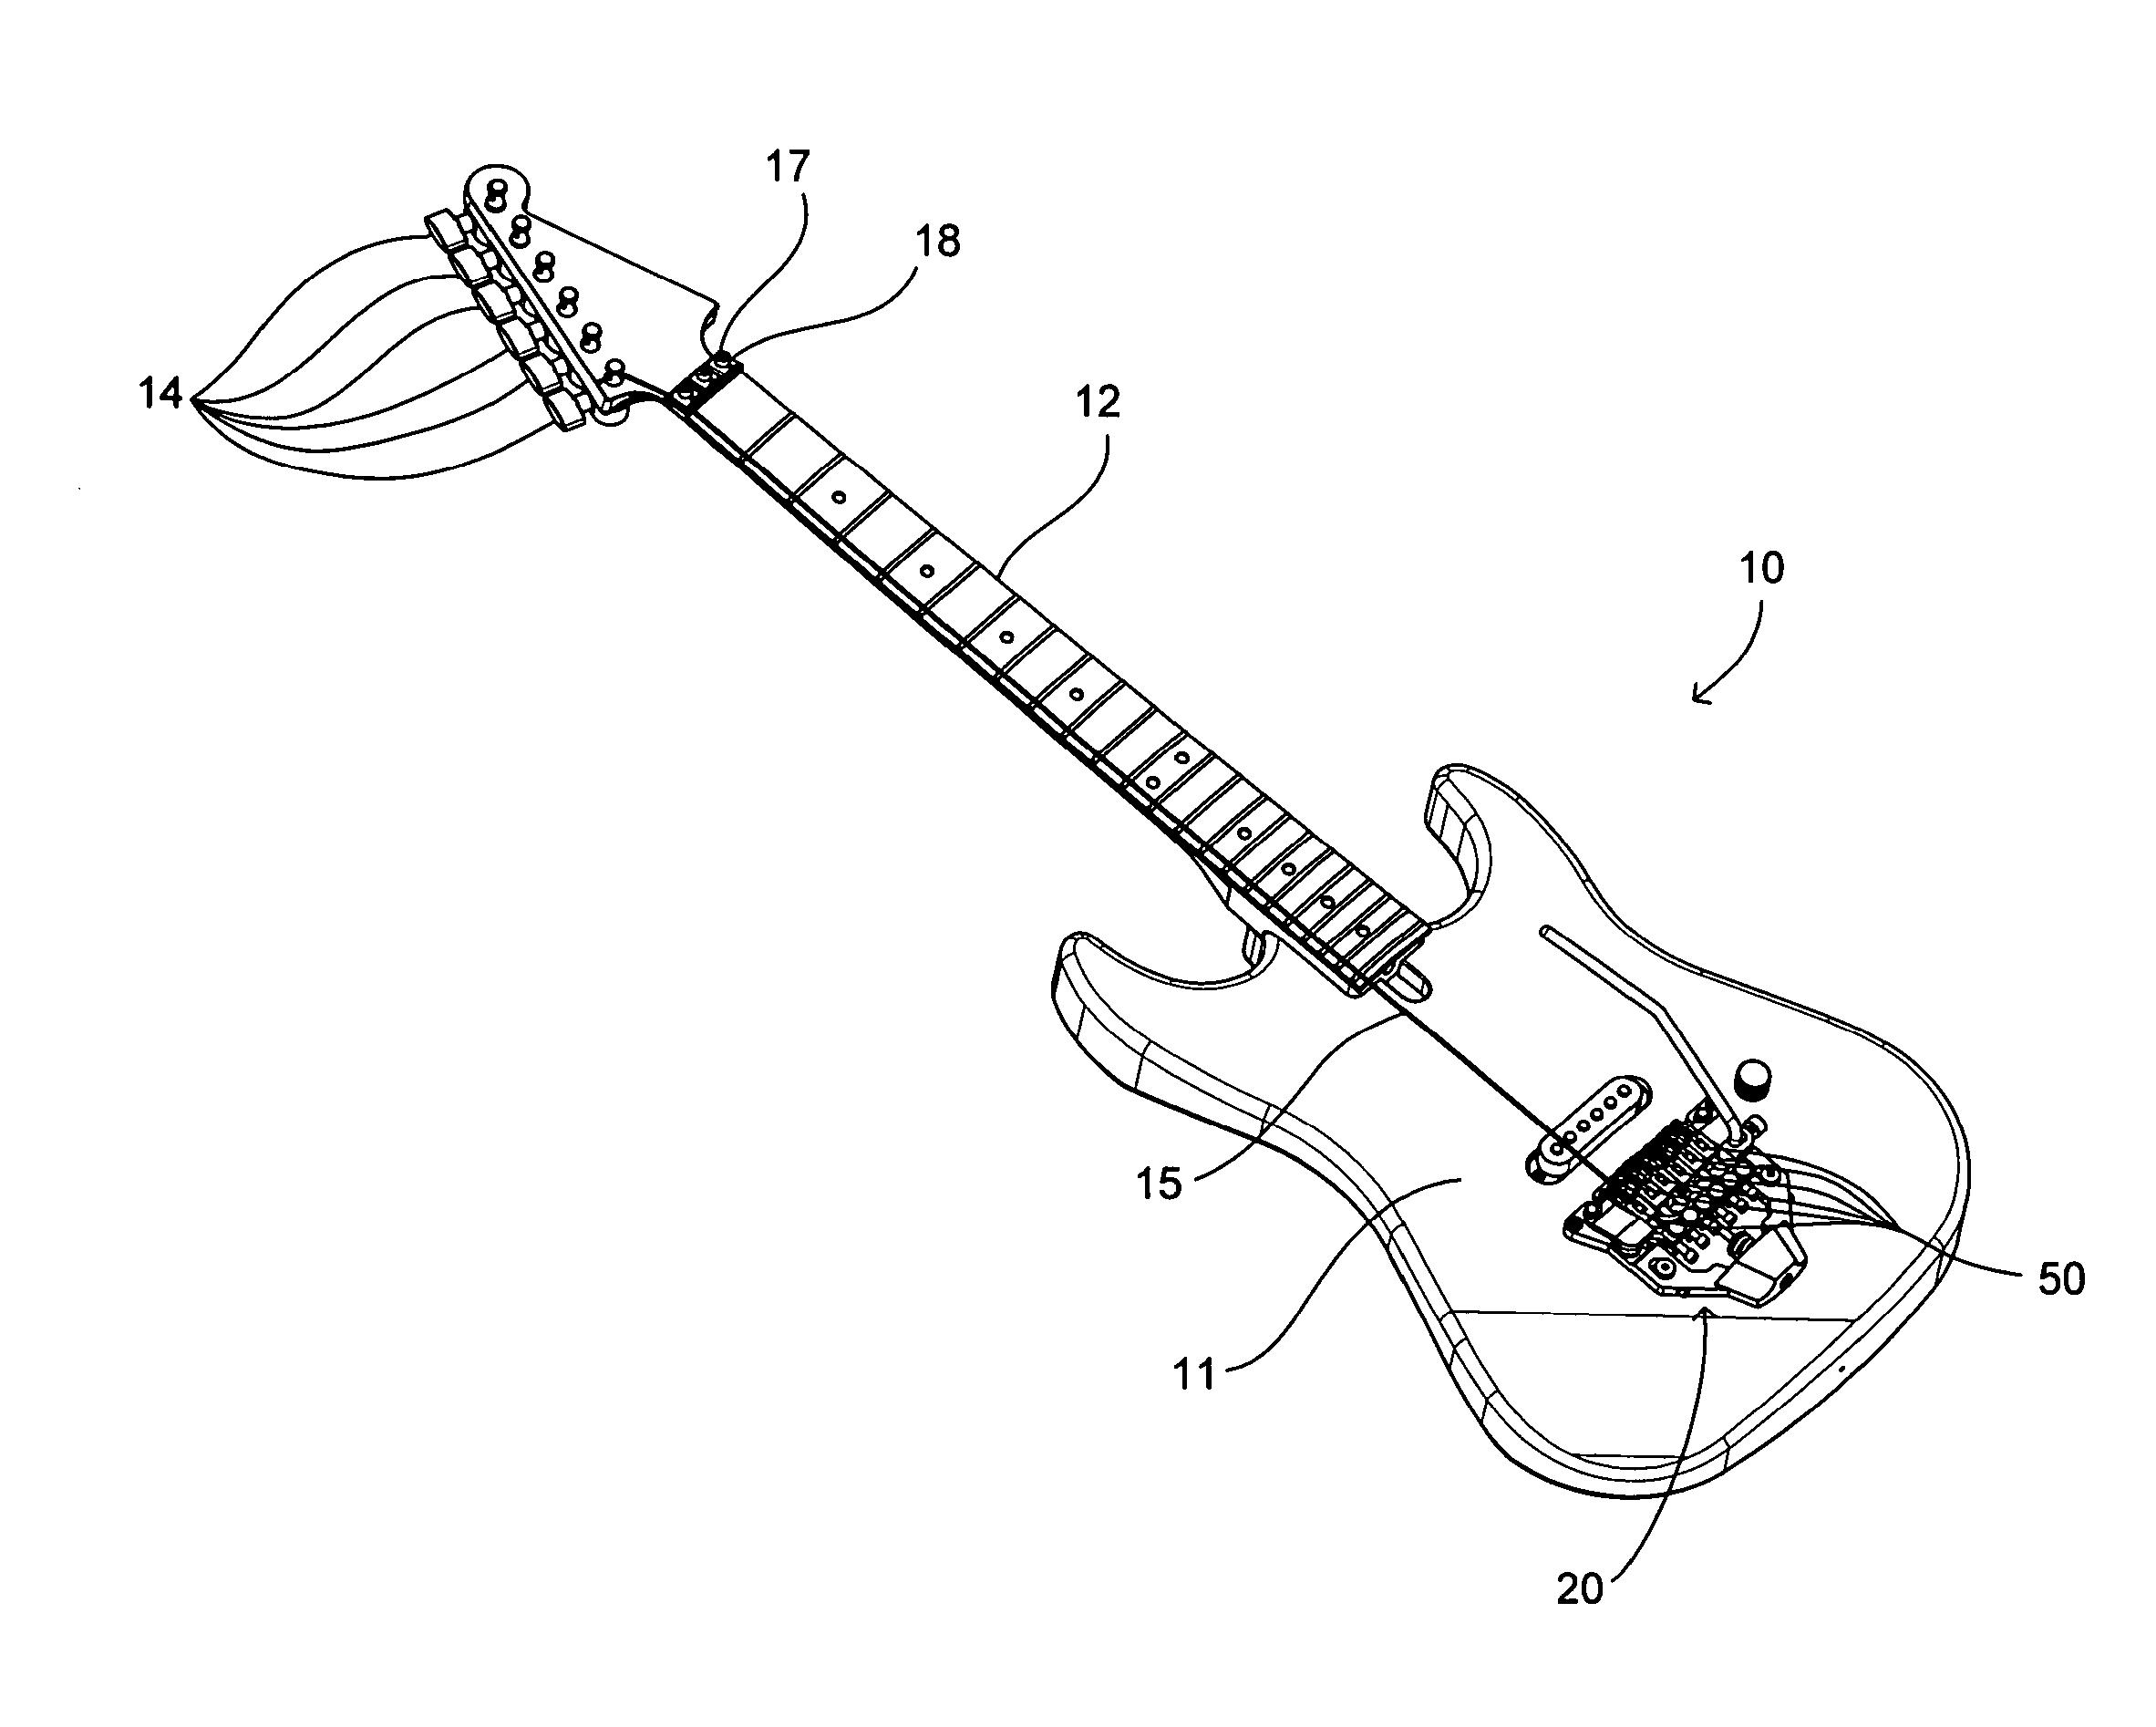 Top mounted tremolo and tuning apparatus